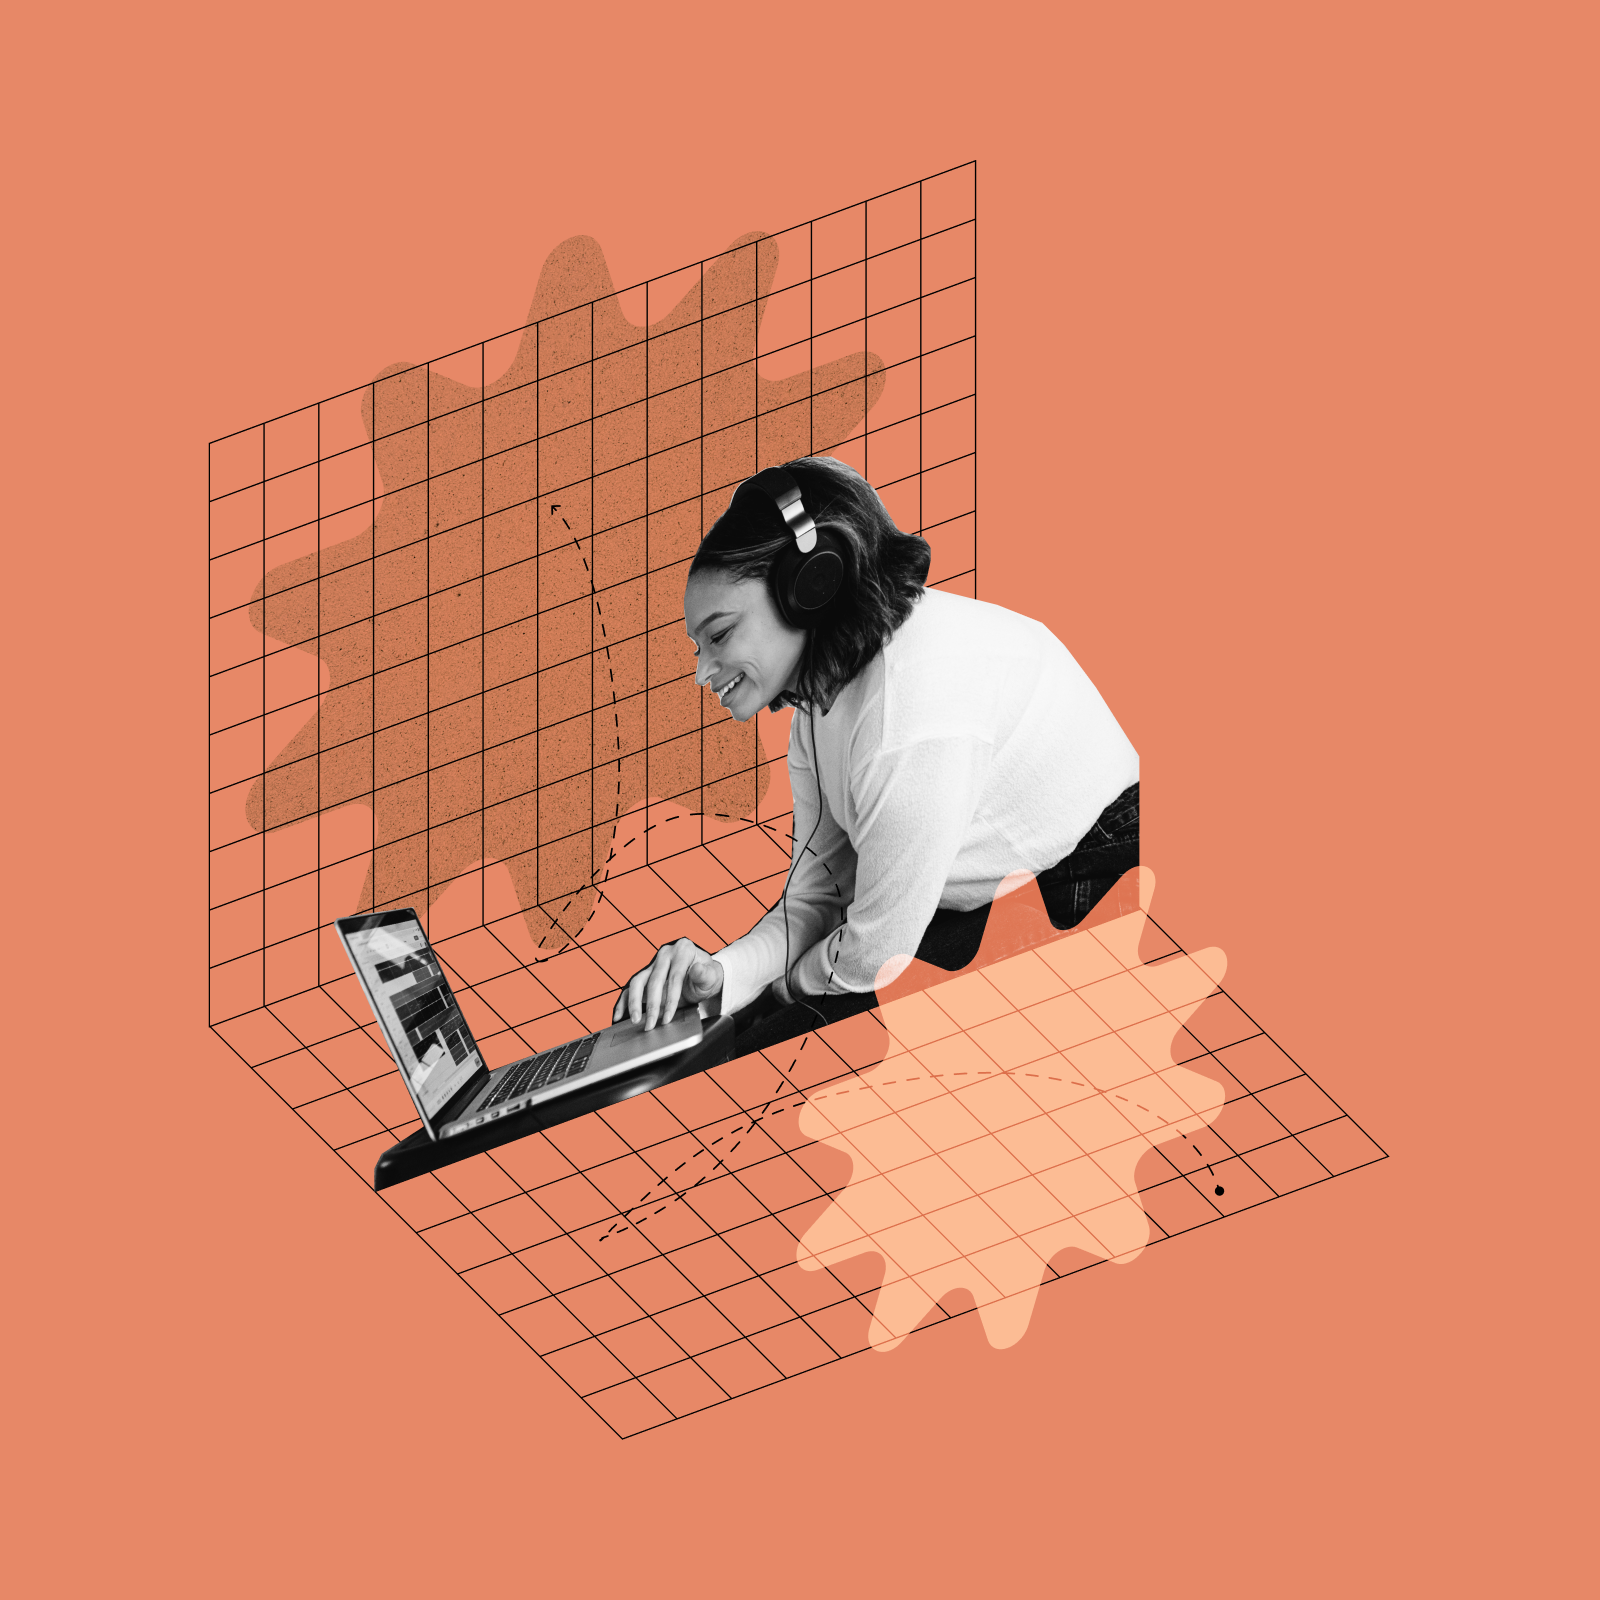 Isometric collage illustration showing a woman in a video call, surrounded by abstact shapes